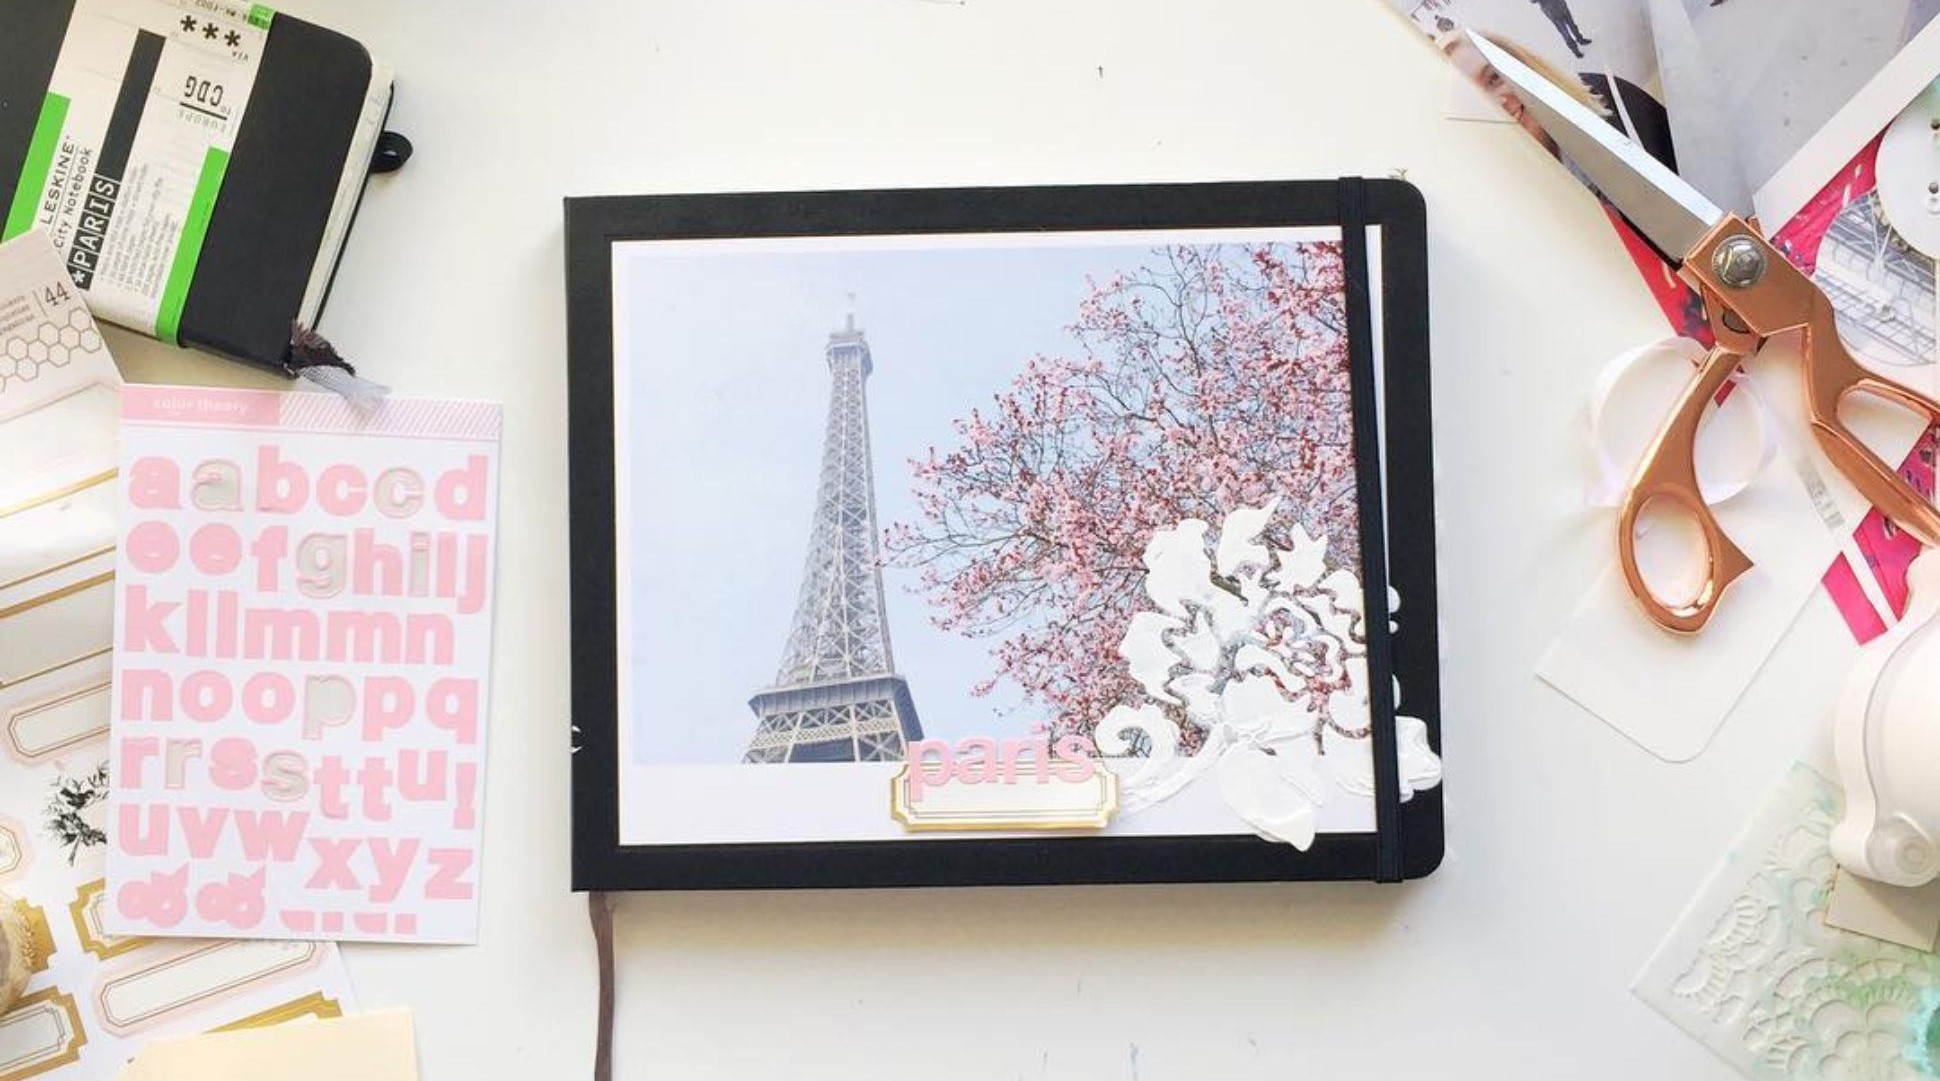 Flatlay of desk with scrapbooking accessories and a Moleskine Photo Book with a cover image of the Eiffel Tower.